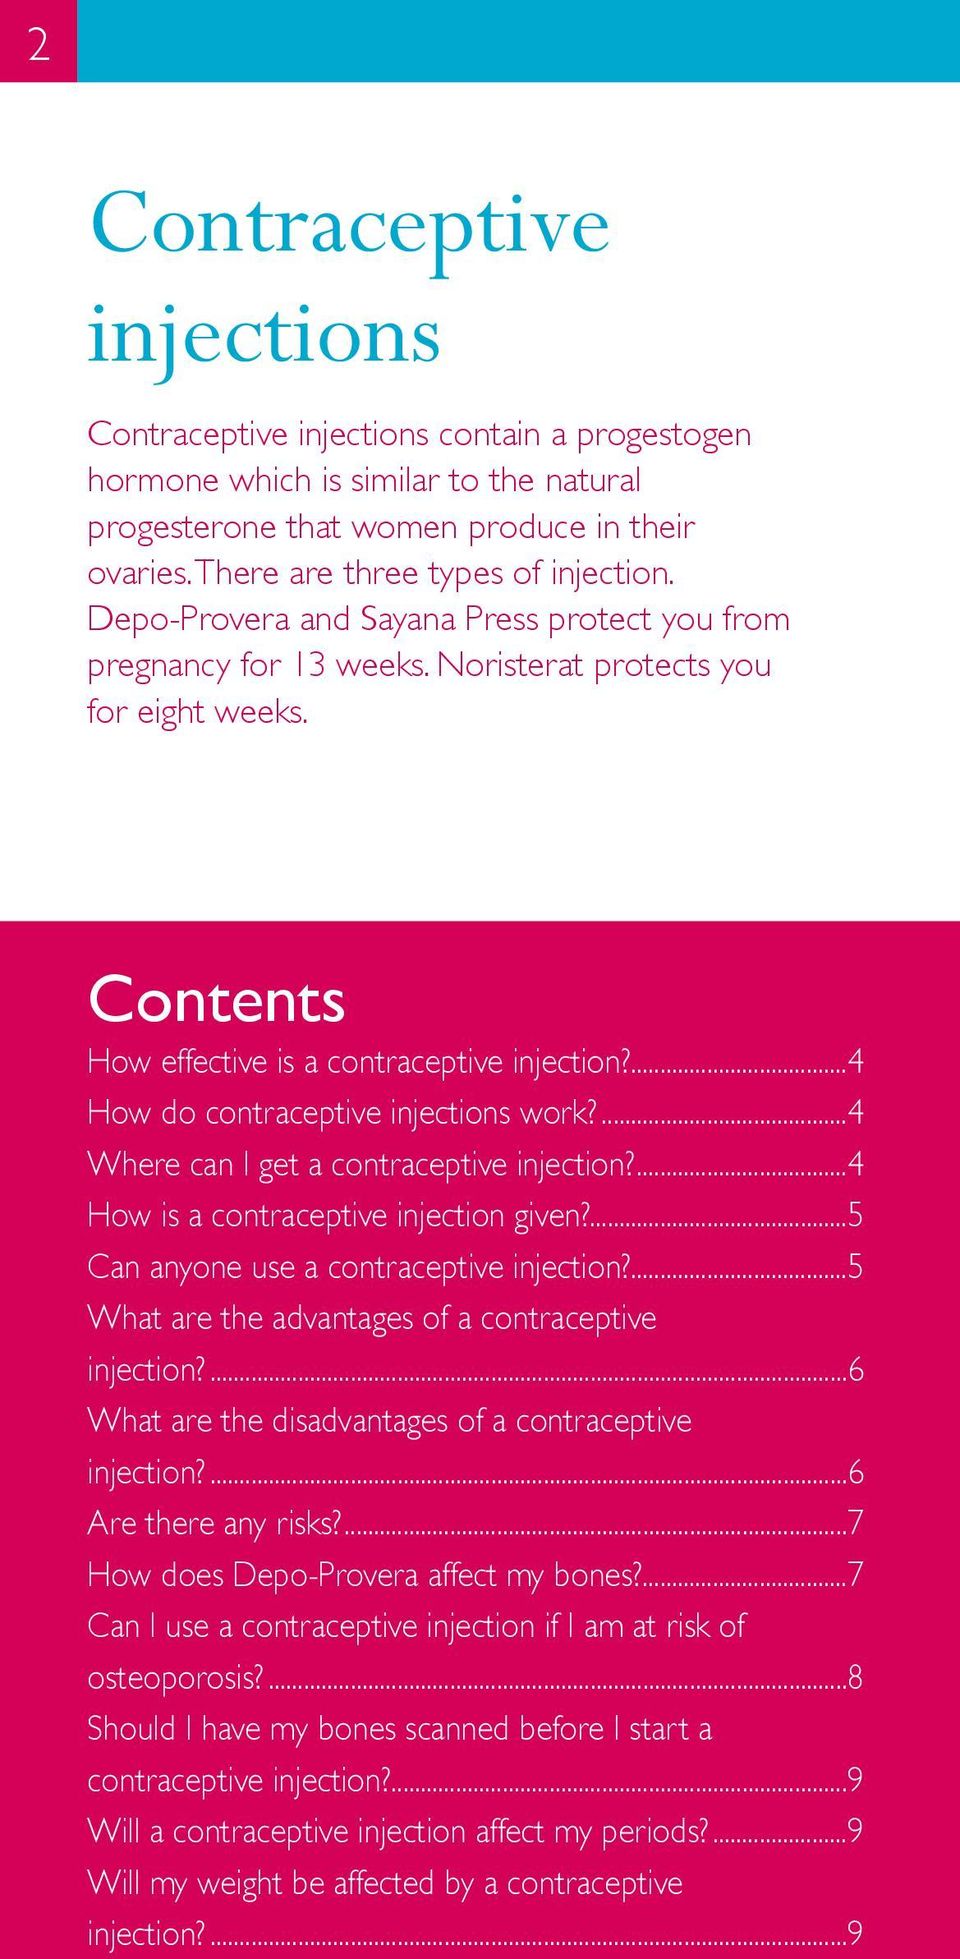 ...4 Where can I get a contraceptive injection?...4 How is a contraceptive injection given?...5 Can anyone use a contraceptive injection?...5 What are the advantages of a contraceptive injection?